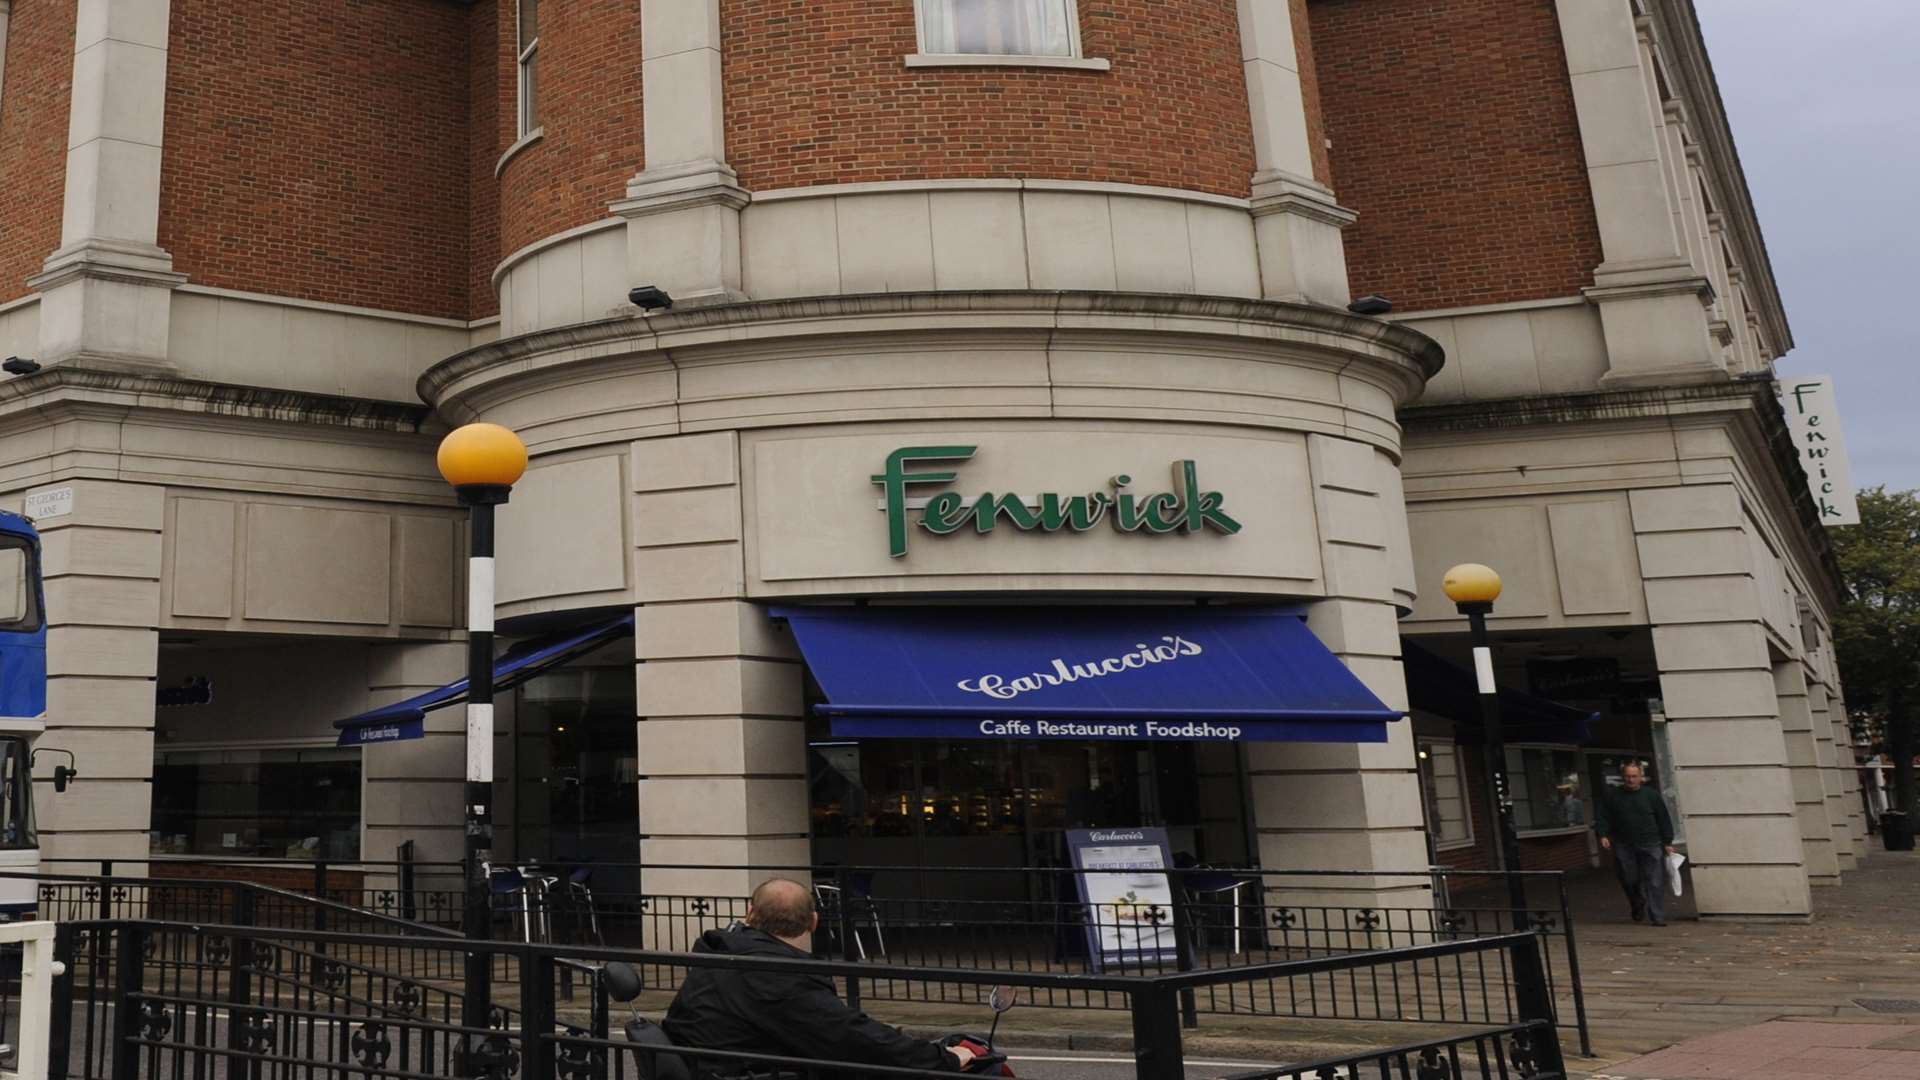 The Fenwick department store in Canterbury